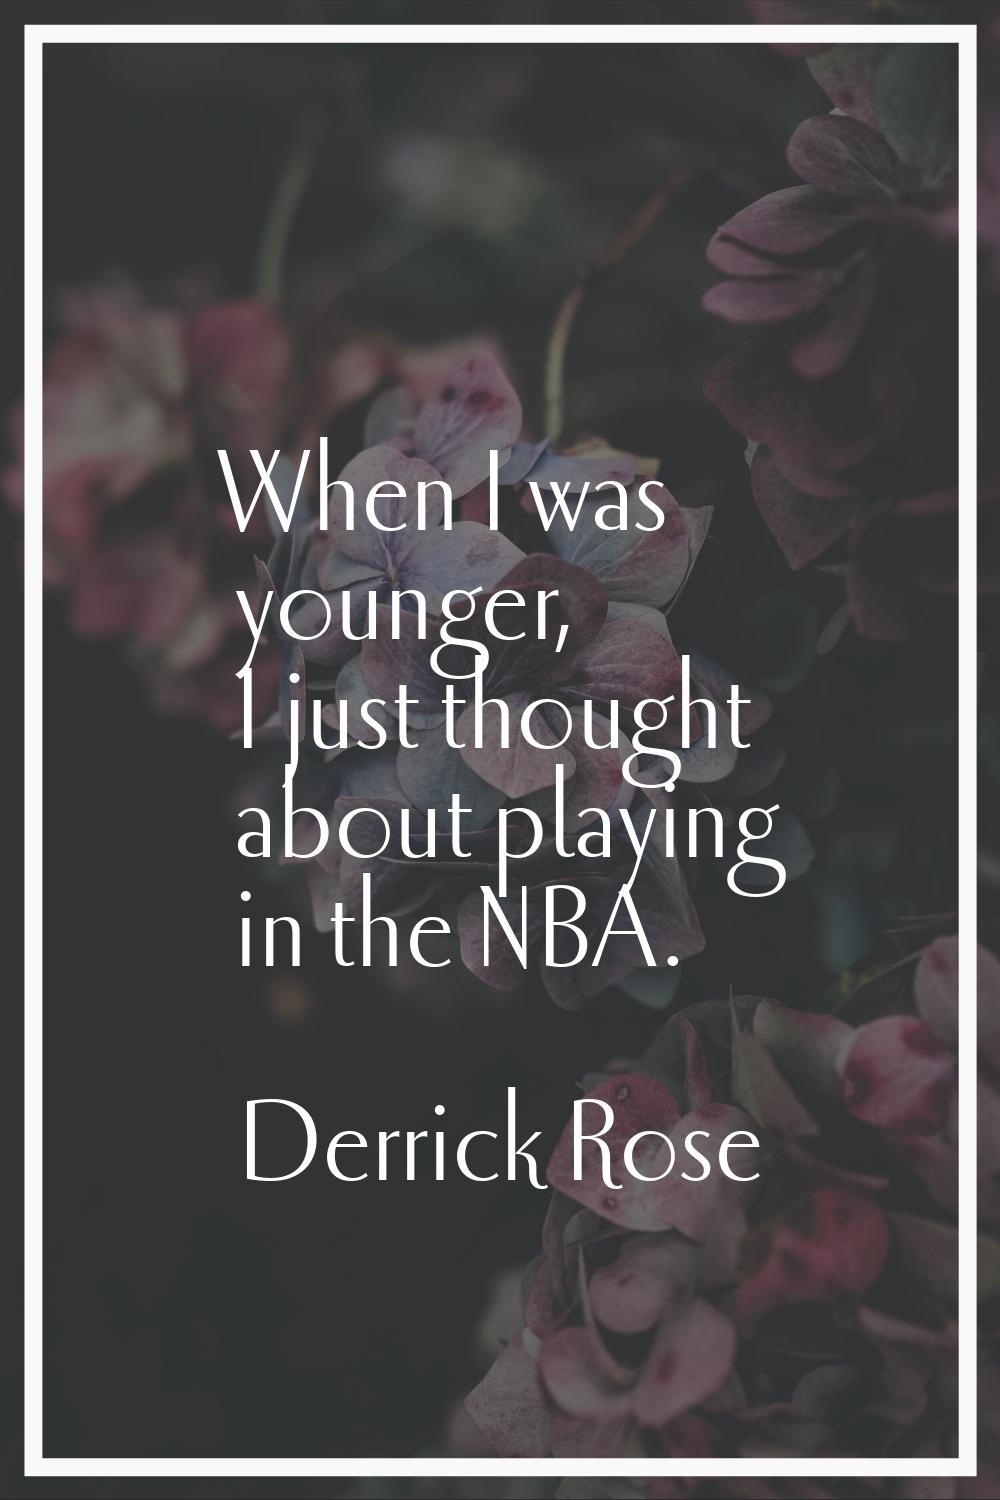 When I was younger, I just thought about playing in the NBA.